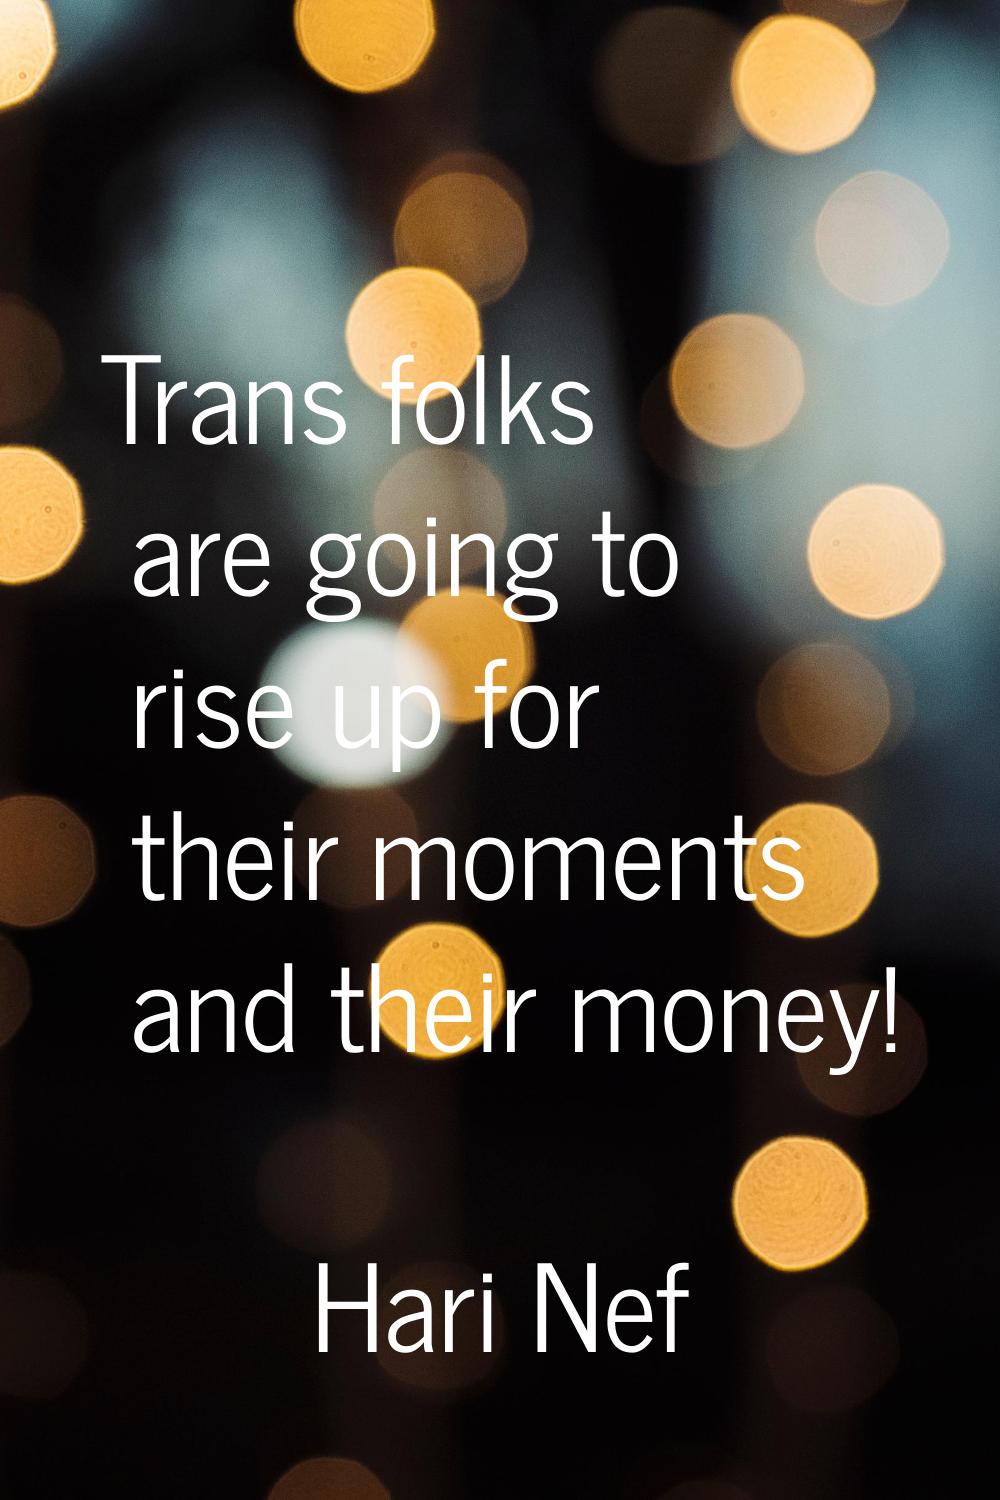 Trans folks are going to rise up for their moments and their money!